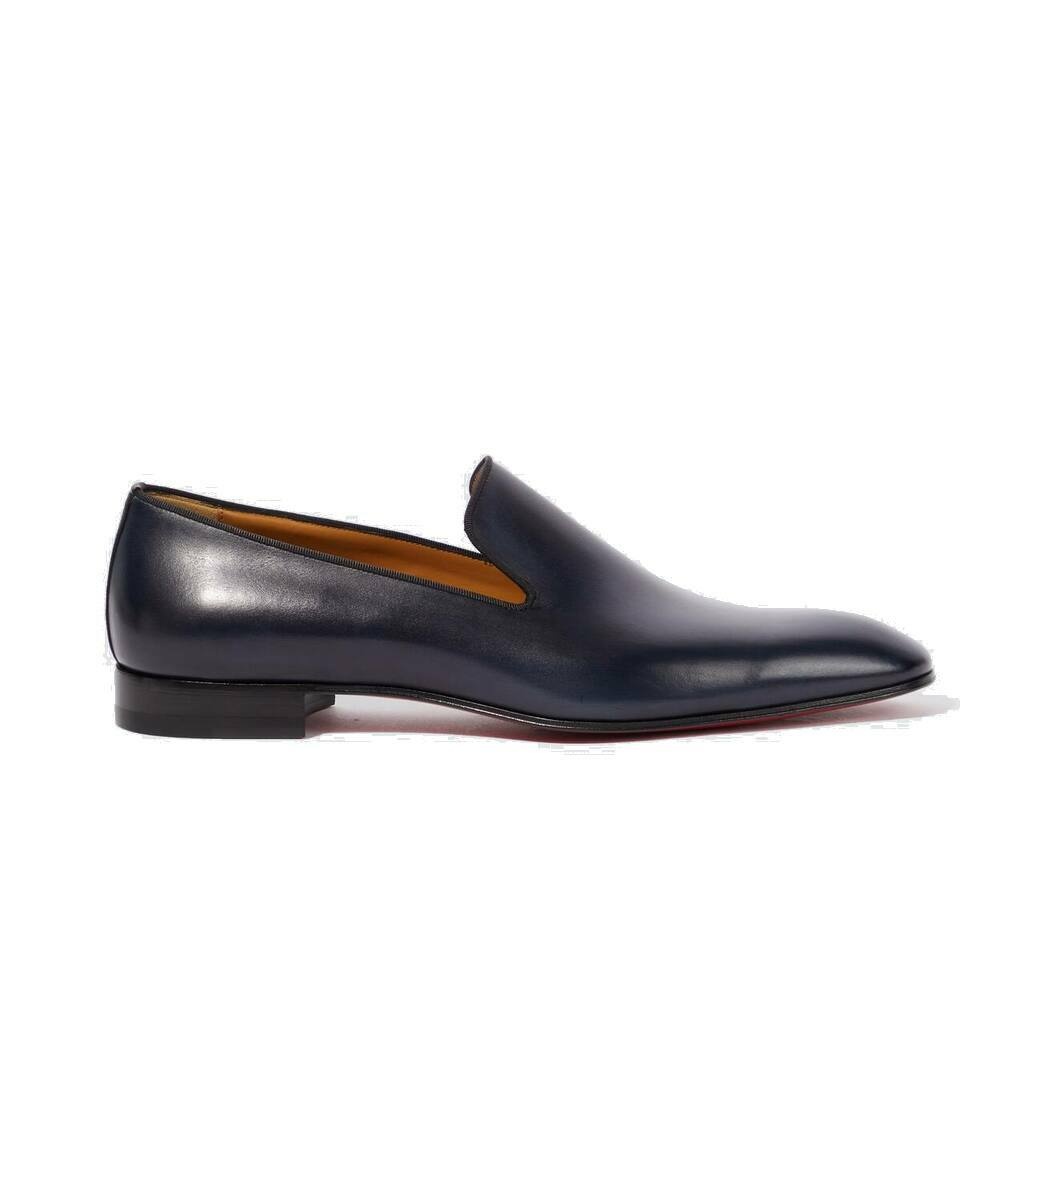 Photo: Christian Louboutin Dandelion leather loafers